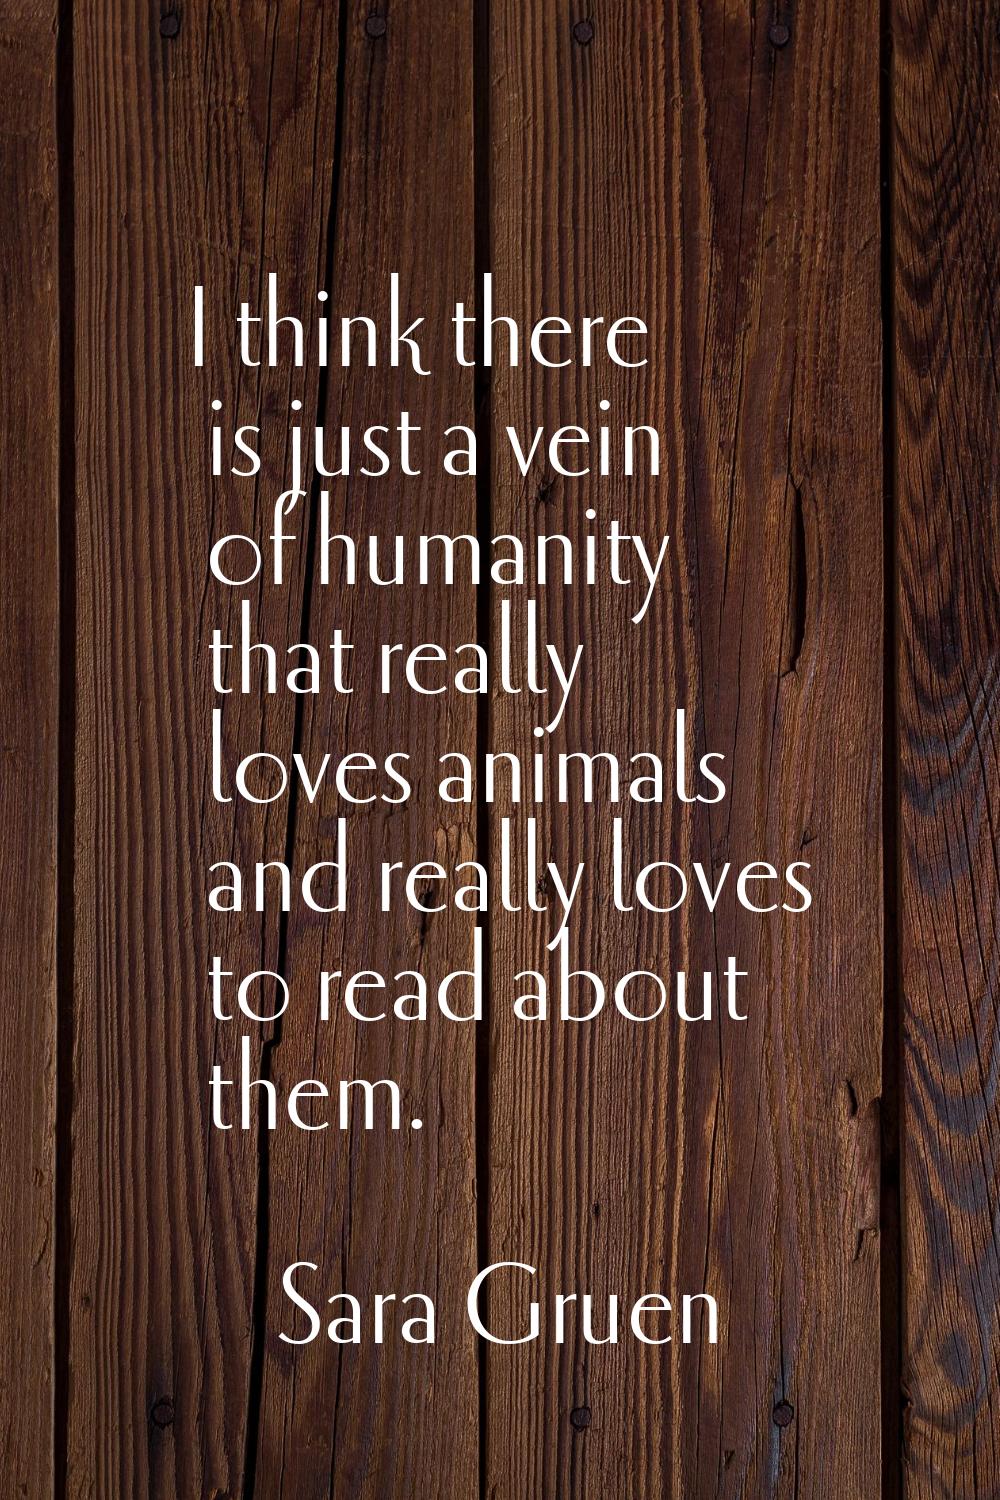 I think there is just a vein of humanity that really loves animals and really loves to read about t